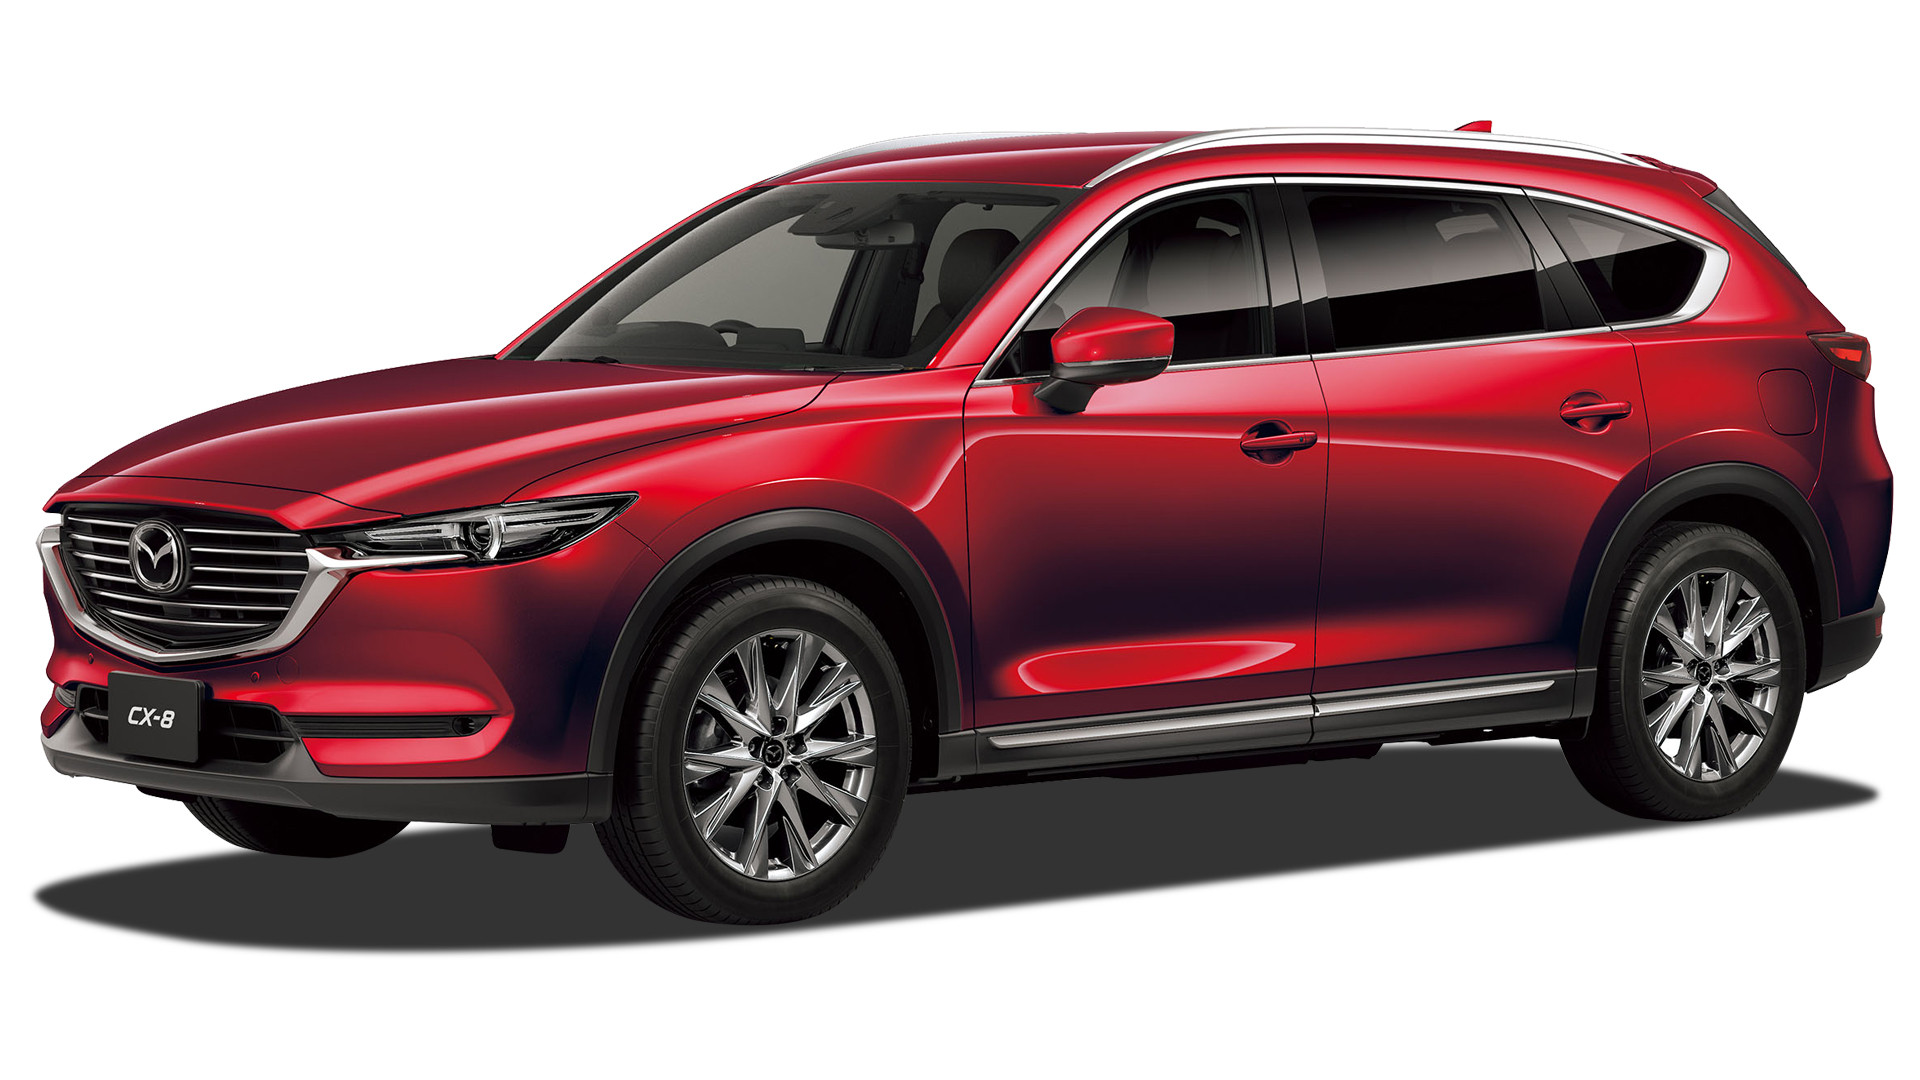 Mazda CX-8 KG (2019) Exterior Image in Malaysia - Reviews, Specs ...